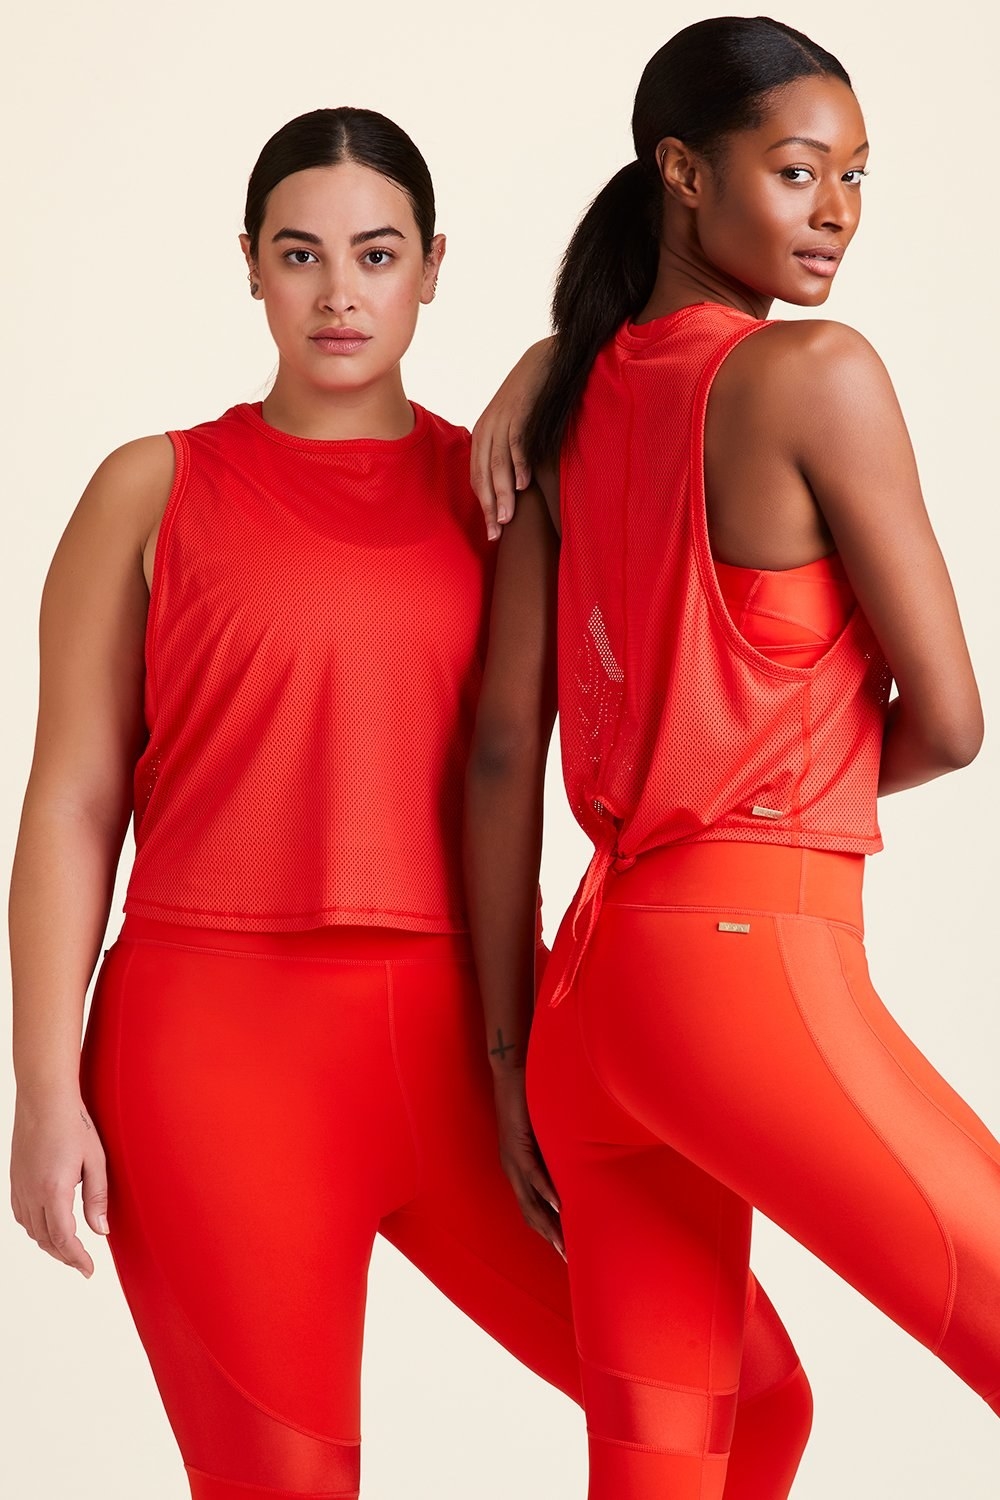 Two models wearing the tank in red with a high neckline and a tie in the back